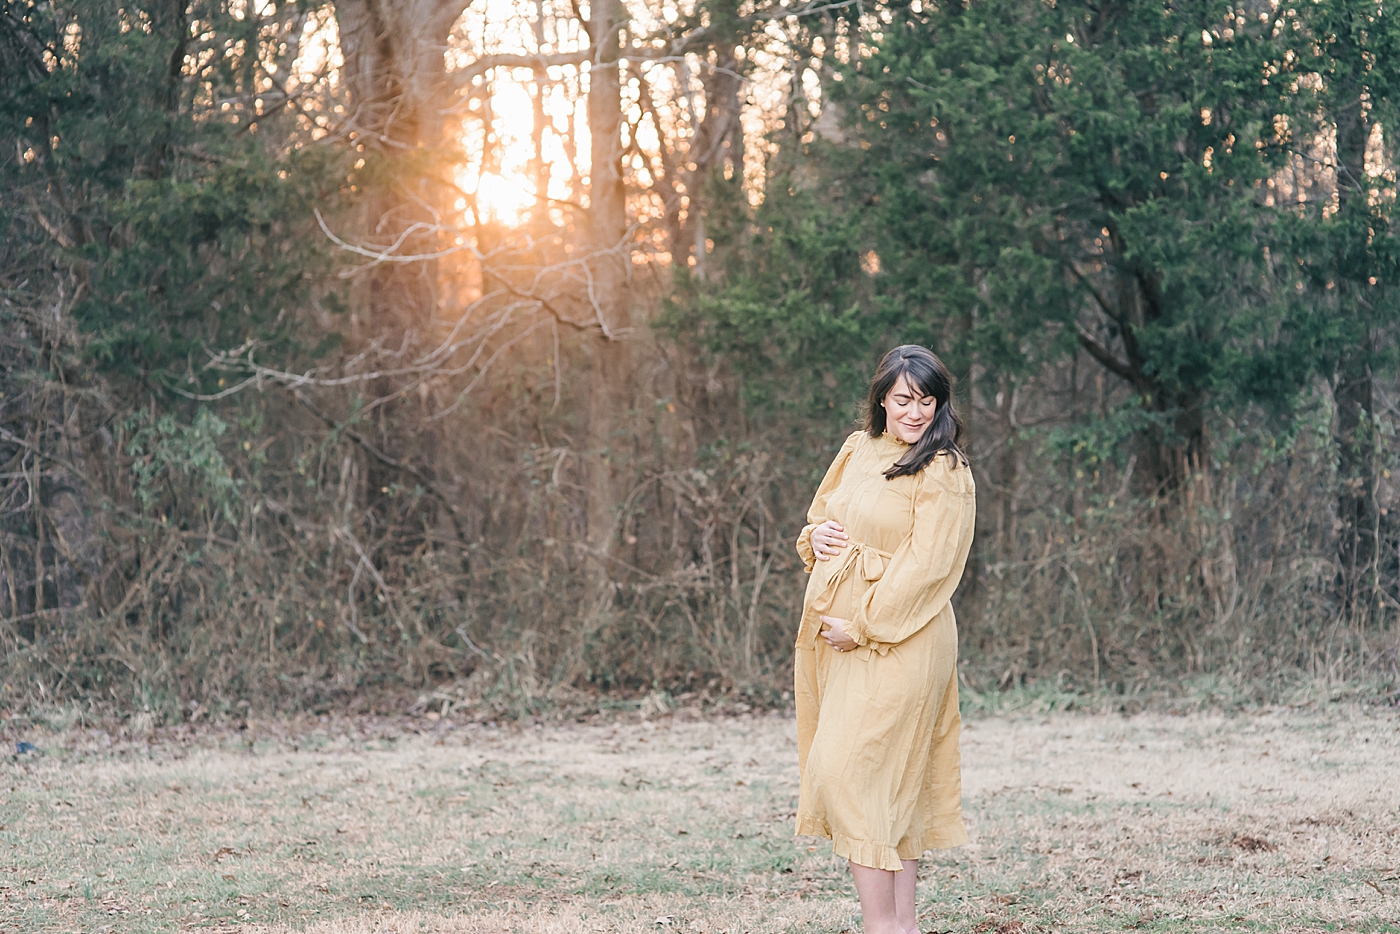 Pregnant woman in yellow dress in a field at sunset at fisher farm park | Photo by Anna Wisjo Photography